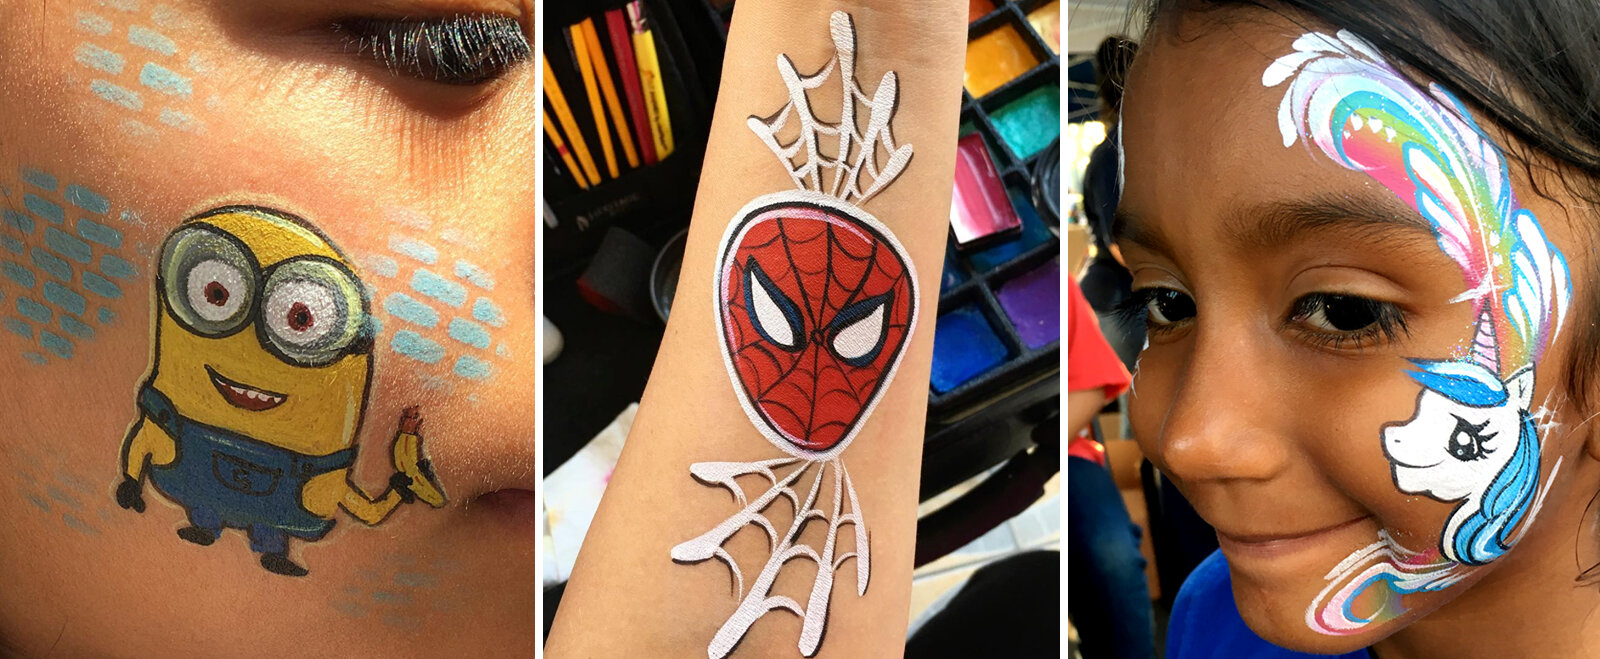 Official Bay Area Face Painters  Kids Face Painting Balloon Twisting  Airbrush Tattoos Henna Hair Braiding Nail Art Waterproof Glitter  Tattos UV Blacklight  Birthday Party  Corporate Events